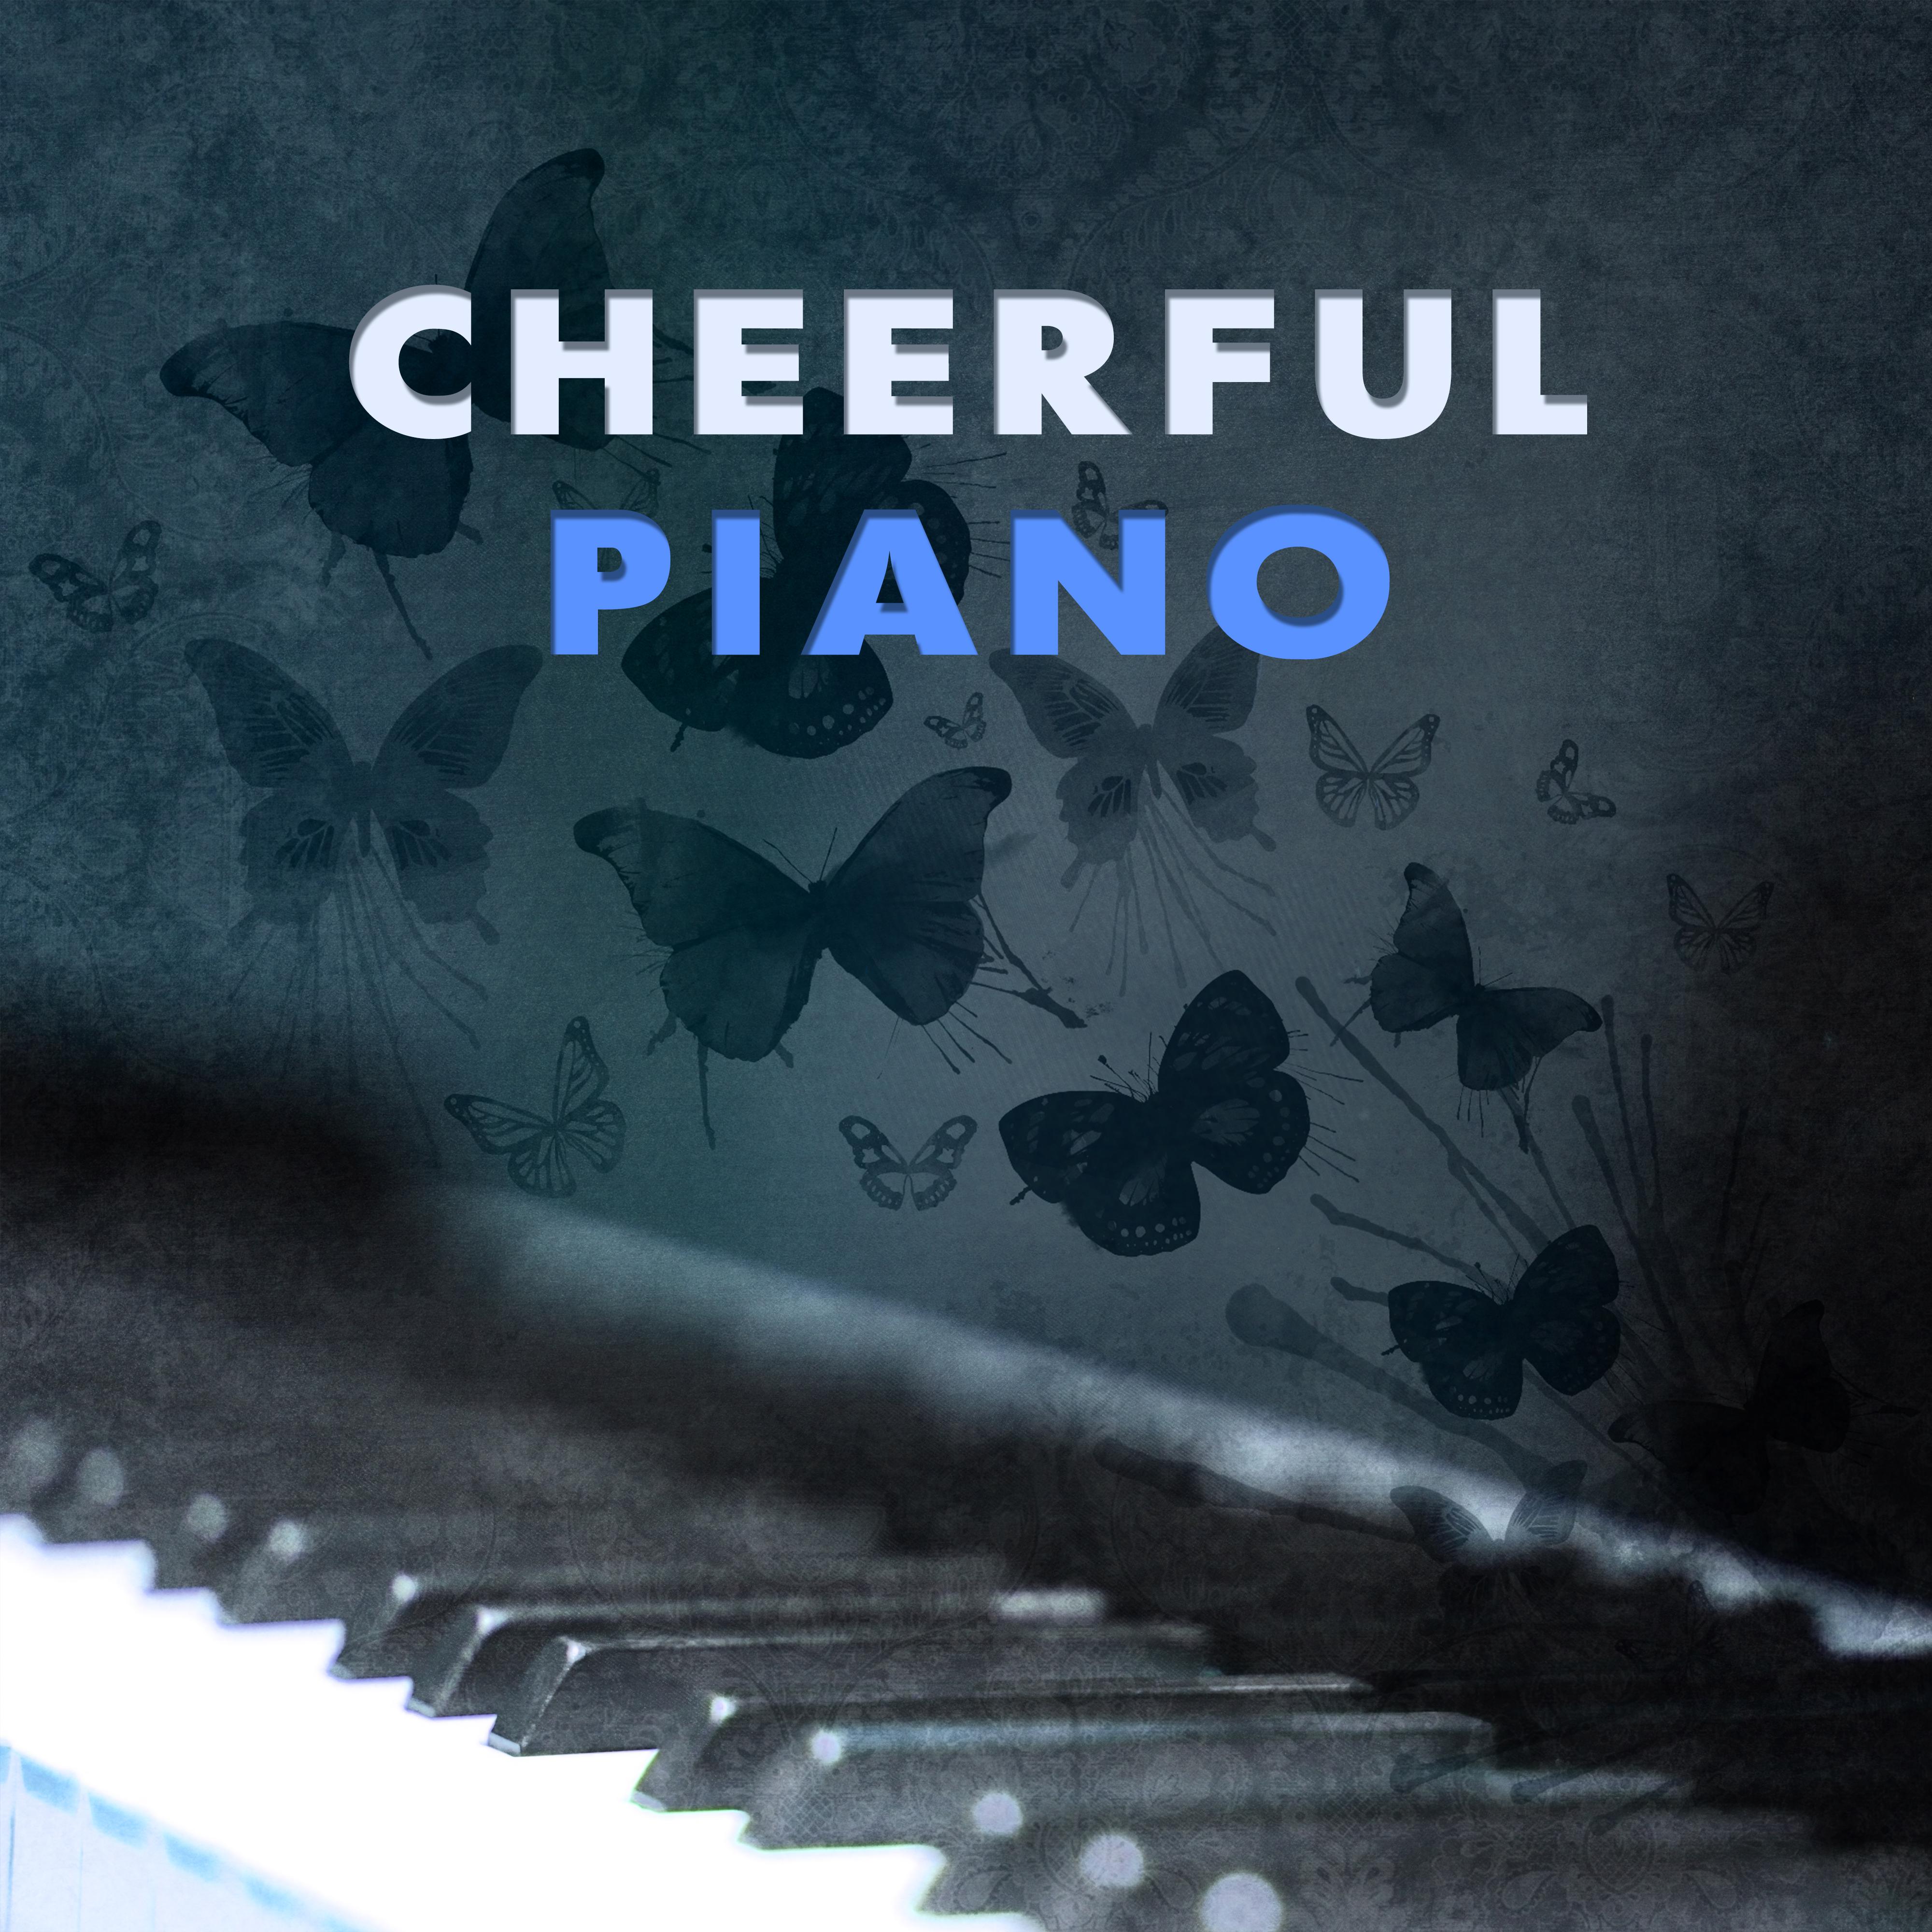 Cheerful Piano  Best Romantic Jazz, Positive Notes of Instrumental Music, Background Music for Restaurant  Cafe, Jazz Lounge